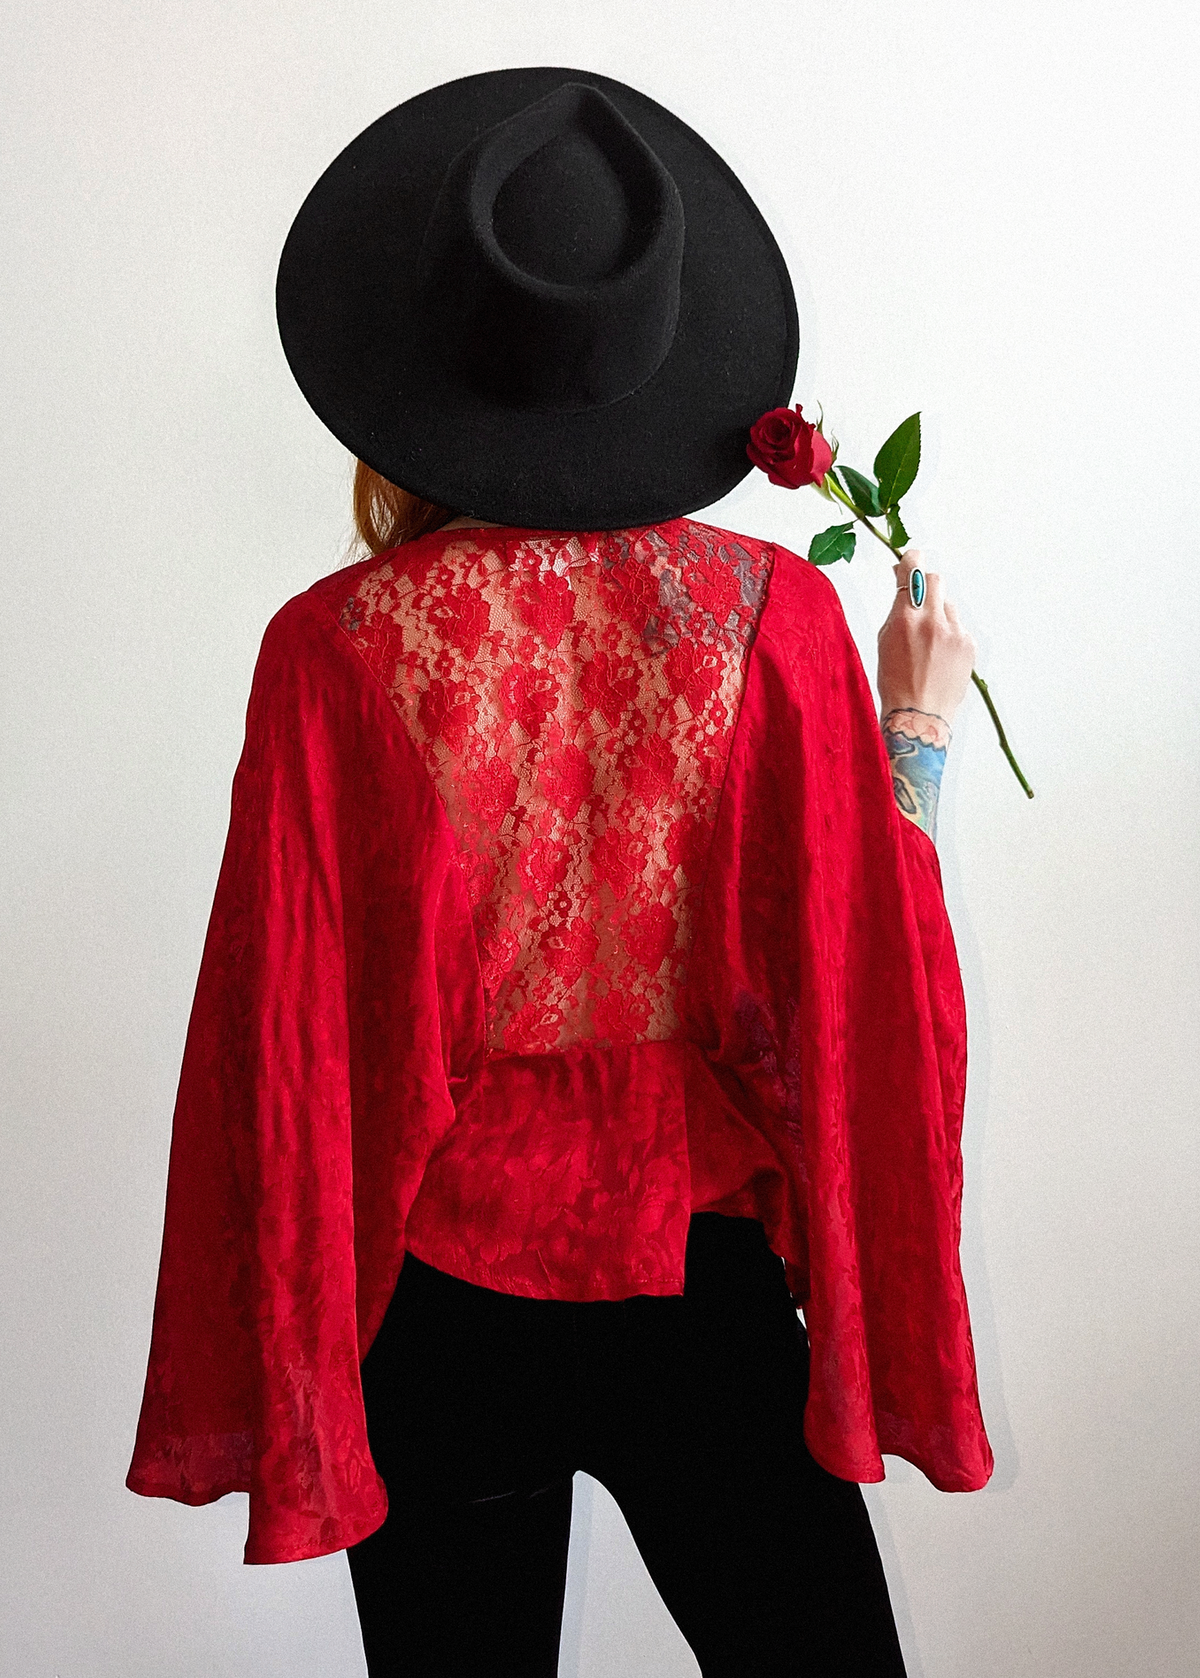 70s inspired ruby red satin batwing cape top with deep v-neckline and tonal floral pattern throughout the red satin fabric. Tassel tie details at front and red lace at back